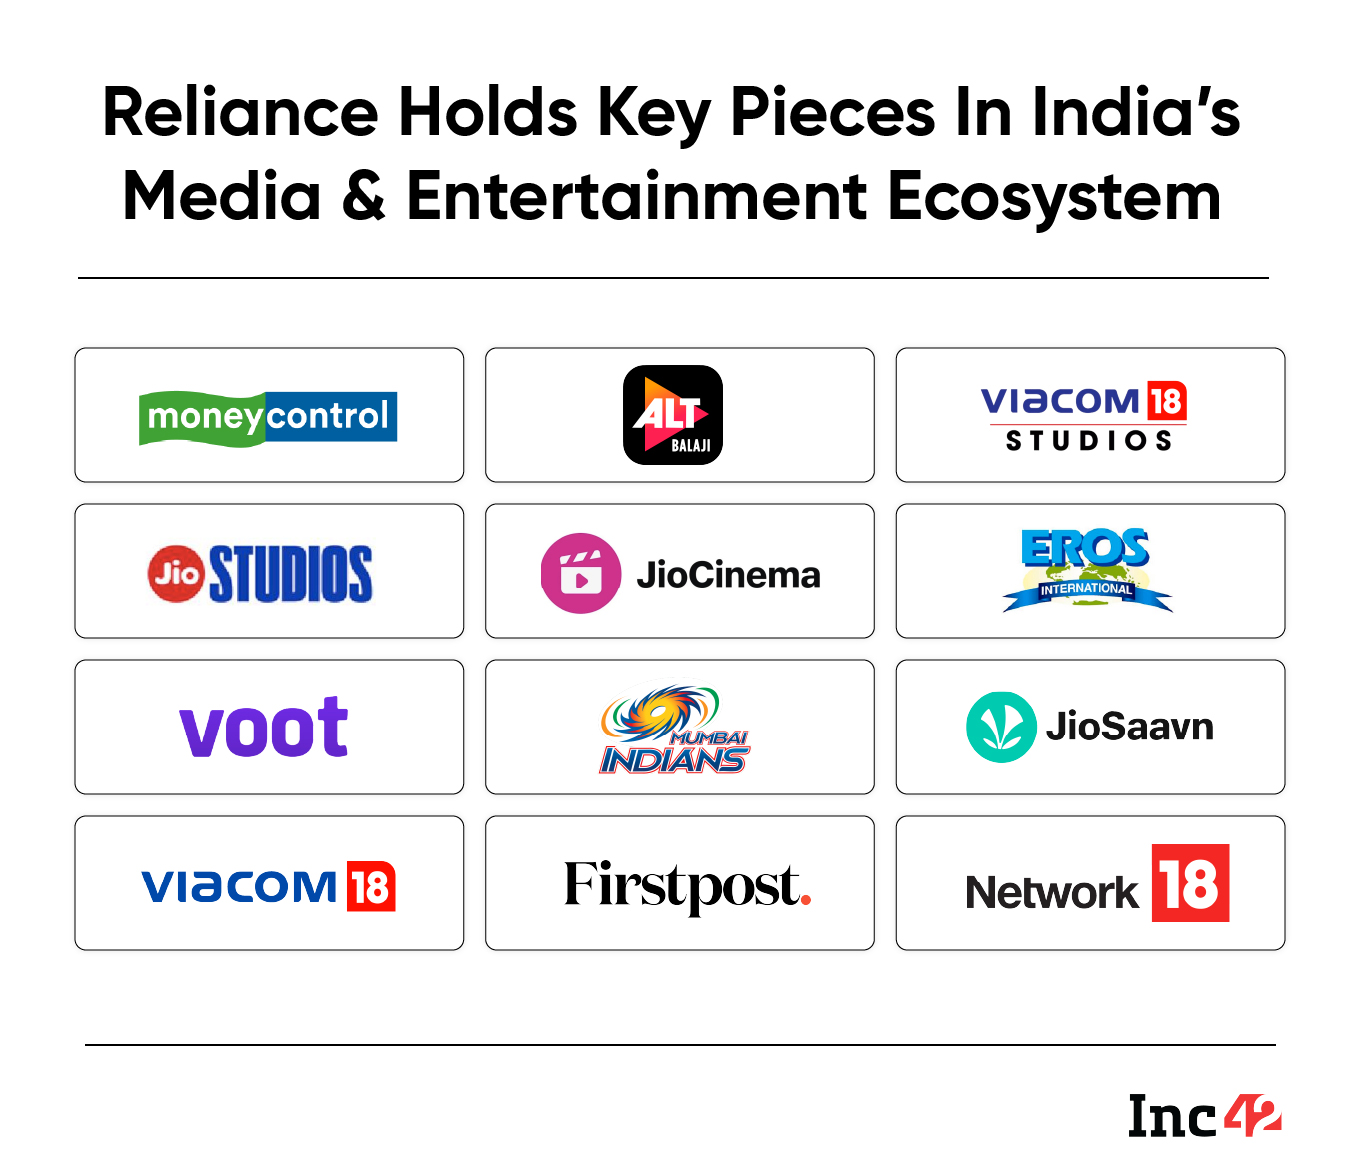 Reliance and Reliance Jio's media empire